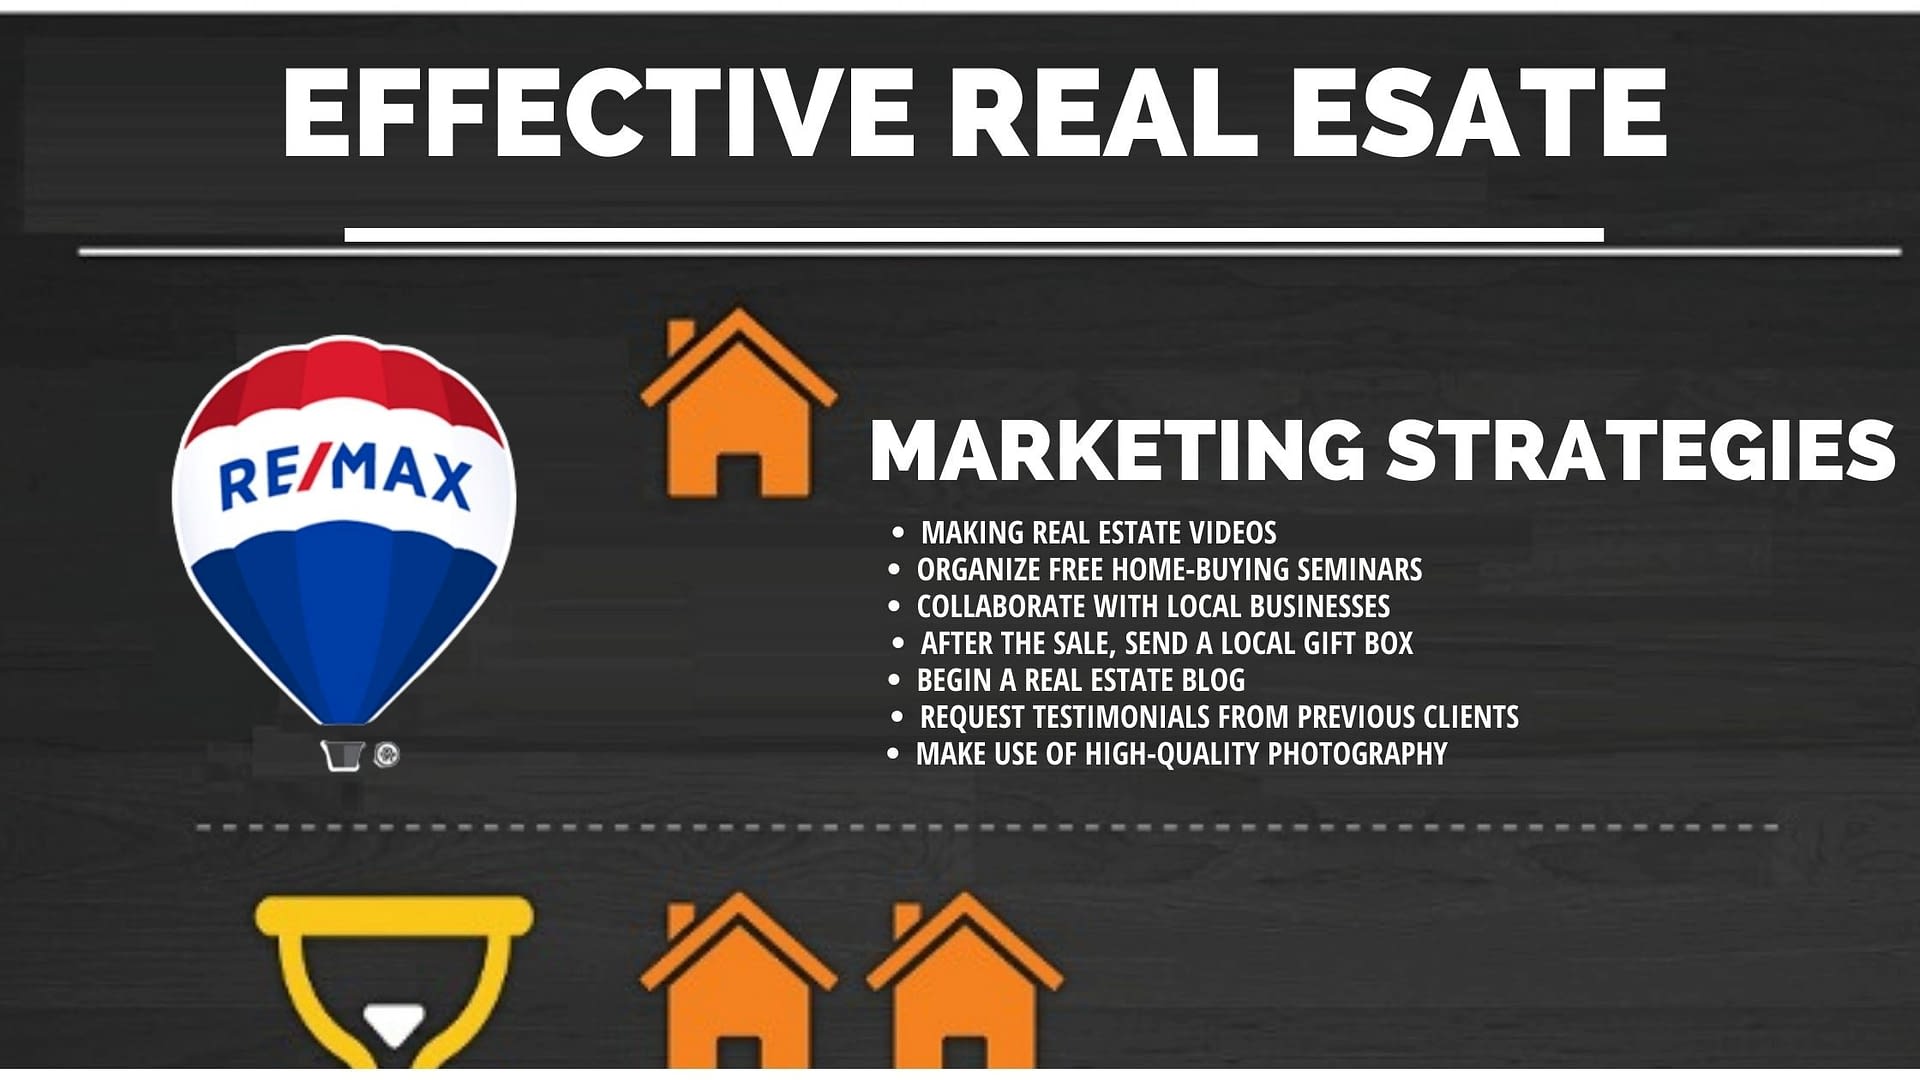 7 Simple and Effective Real Estate Marketing Strategies!